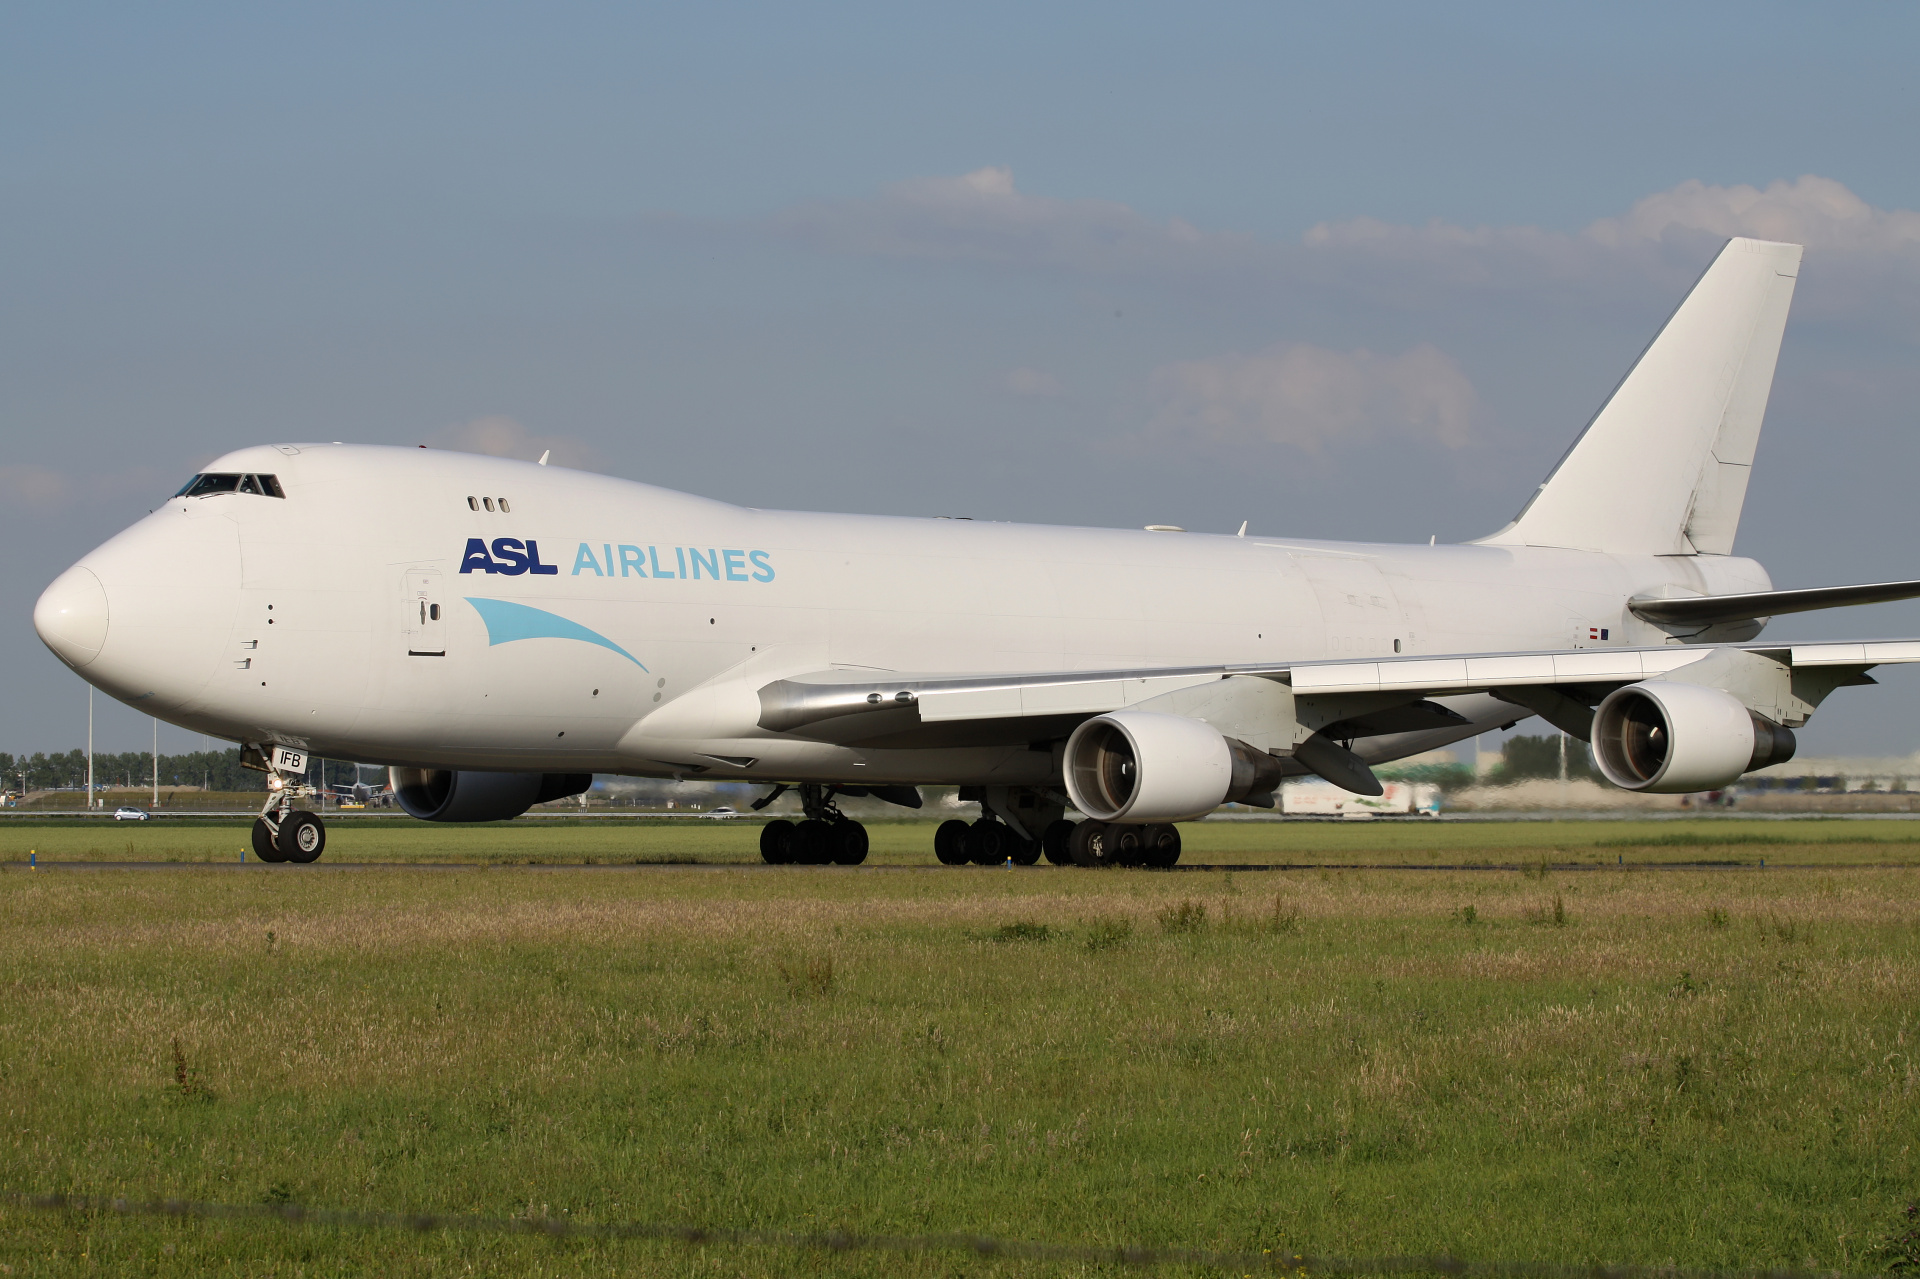 OE-IFB, ASL Airlines Belgium (Aircraft » Schiphol Spotting » Boeing 747-400F)